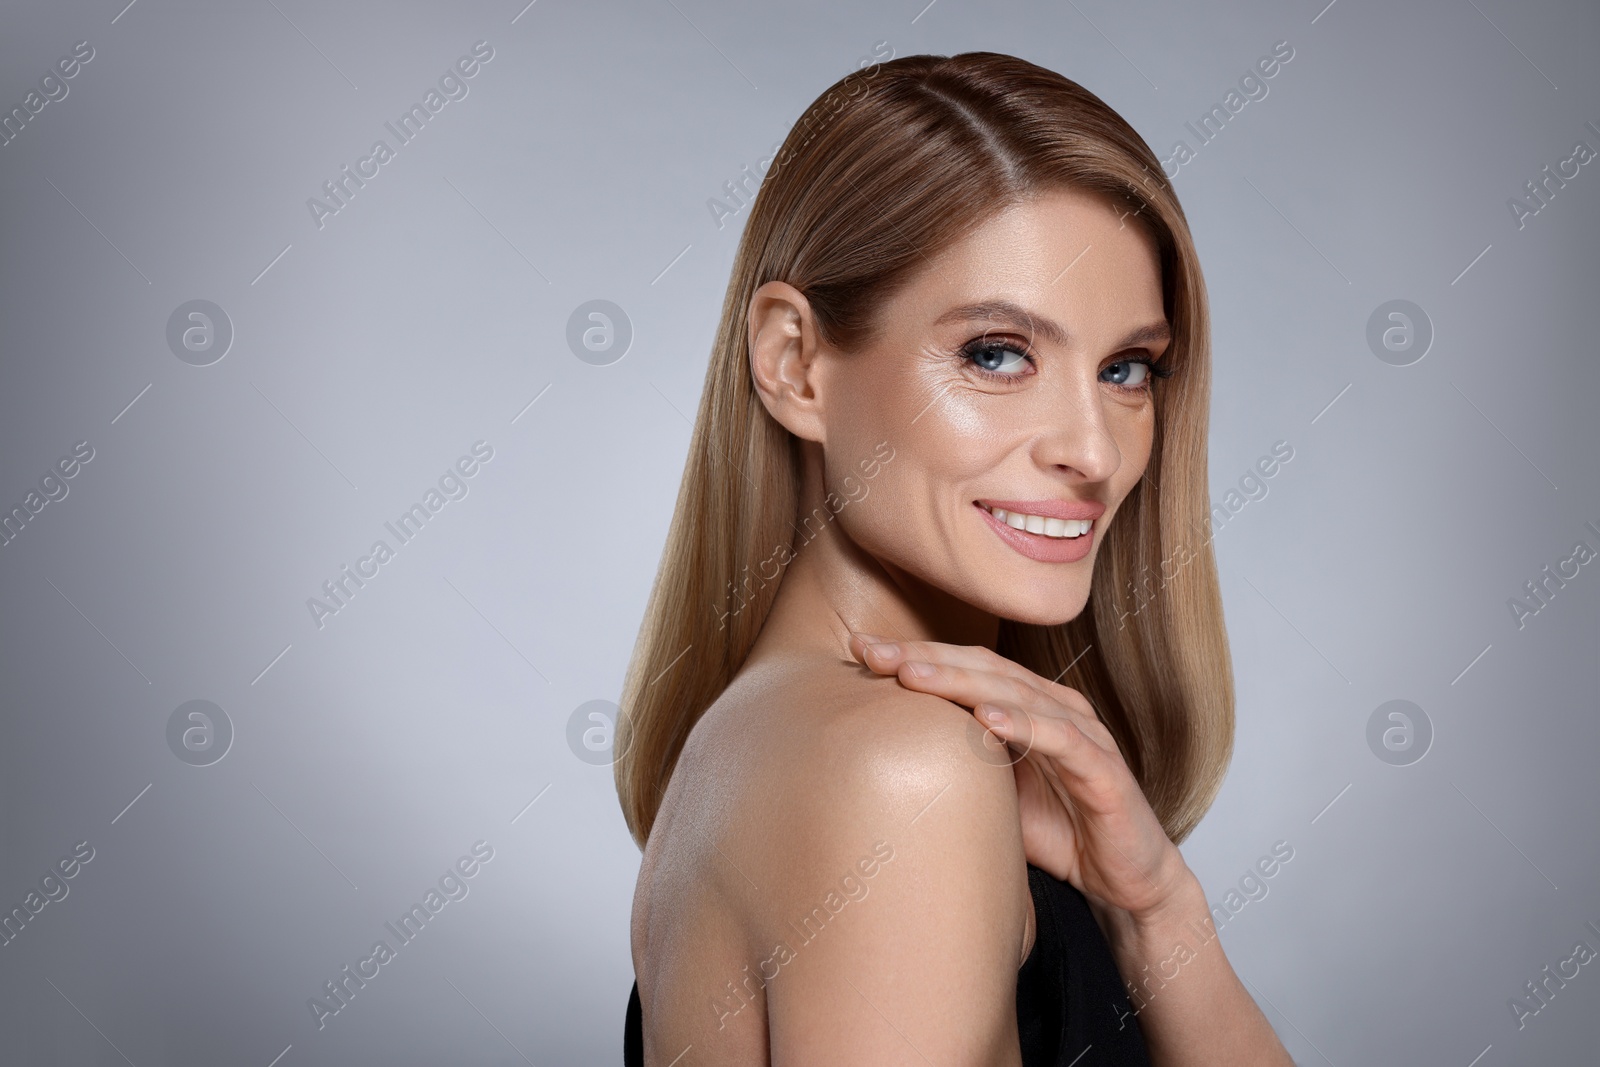 Image of Portrait of stylish attractive woman with blonde hair smiling on grey background, space for text